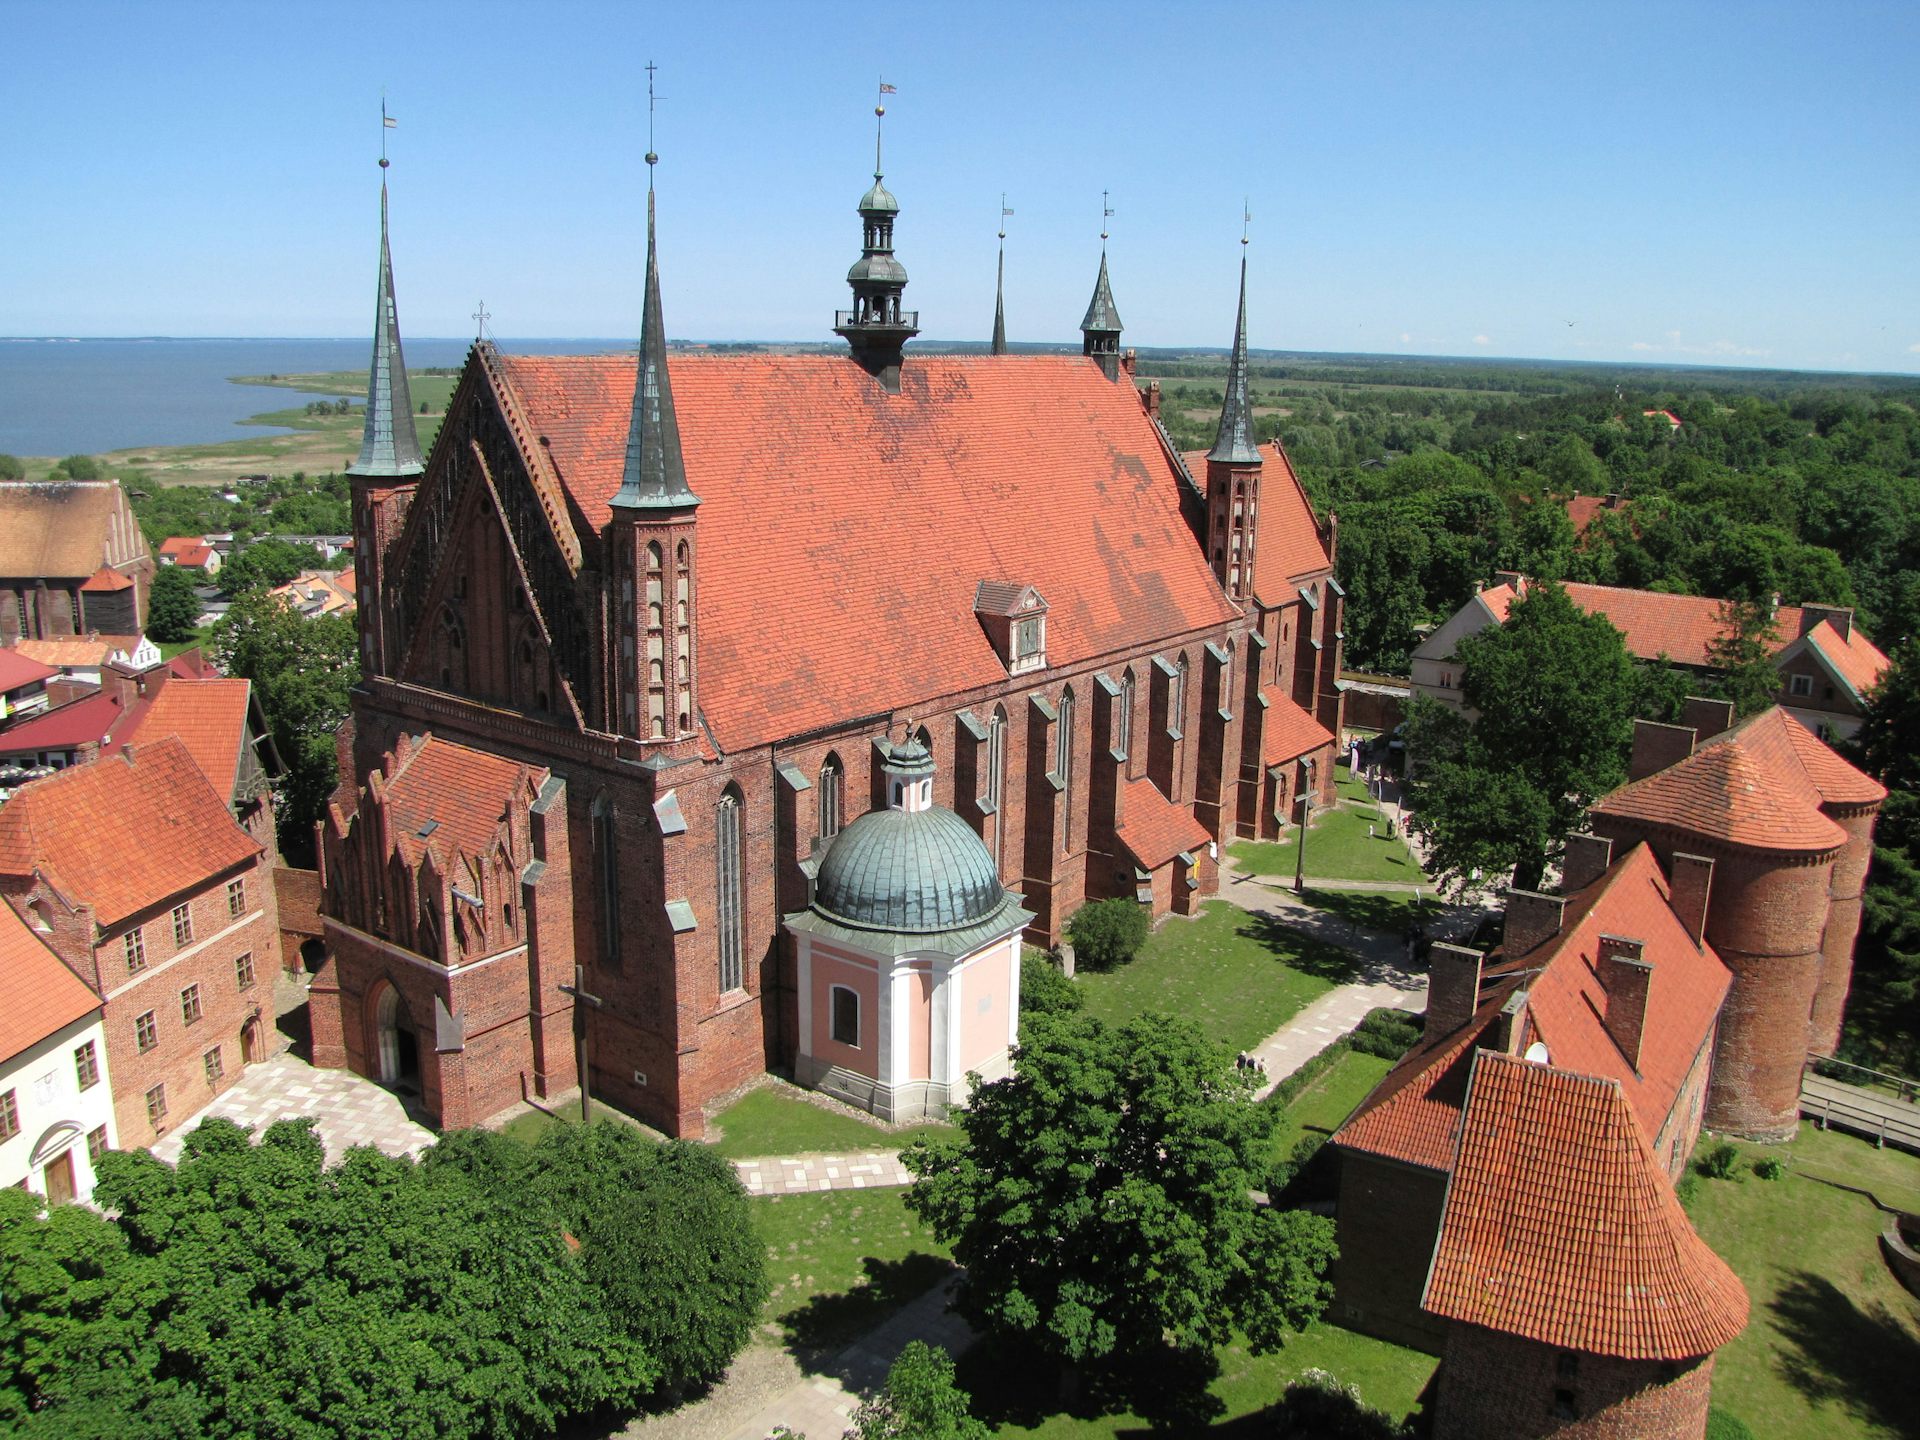 A big brick church with narrow towering steeples in center and at corners, and a red roof.